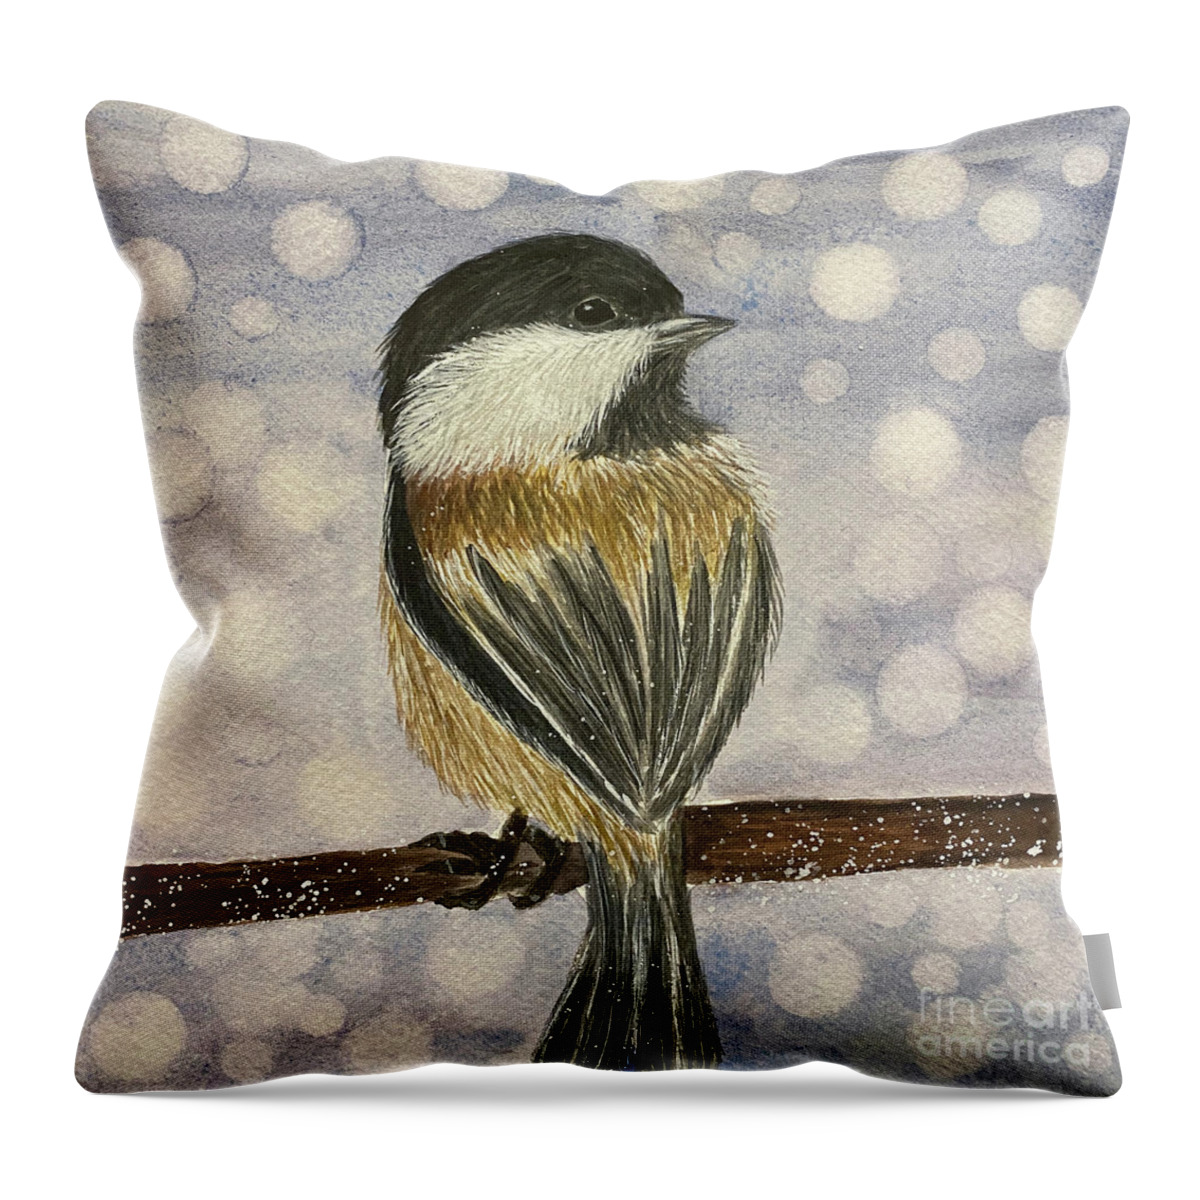 Chickadee Throw Pillow featuring the painting Chickadee In Snow by Lisa Neuman